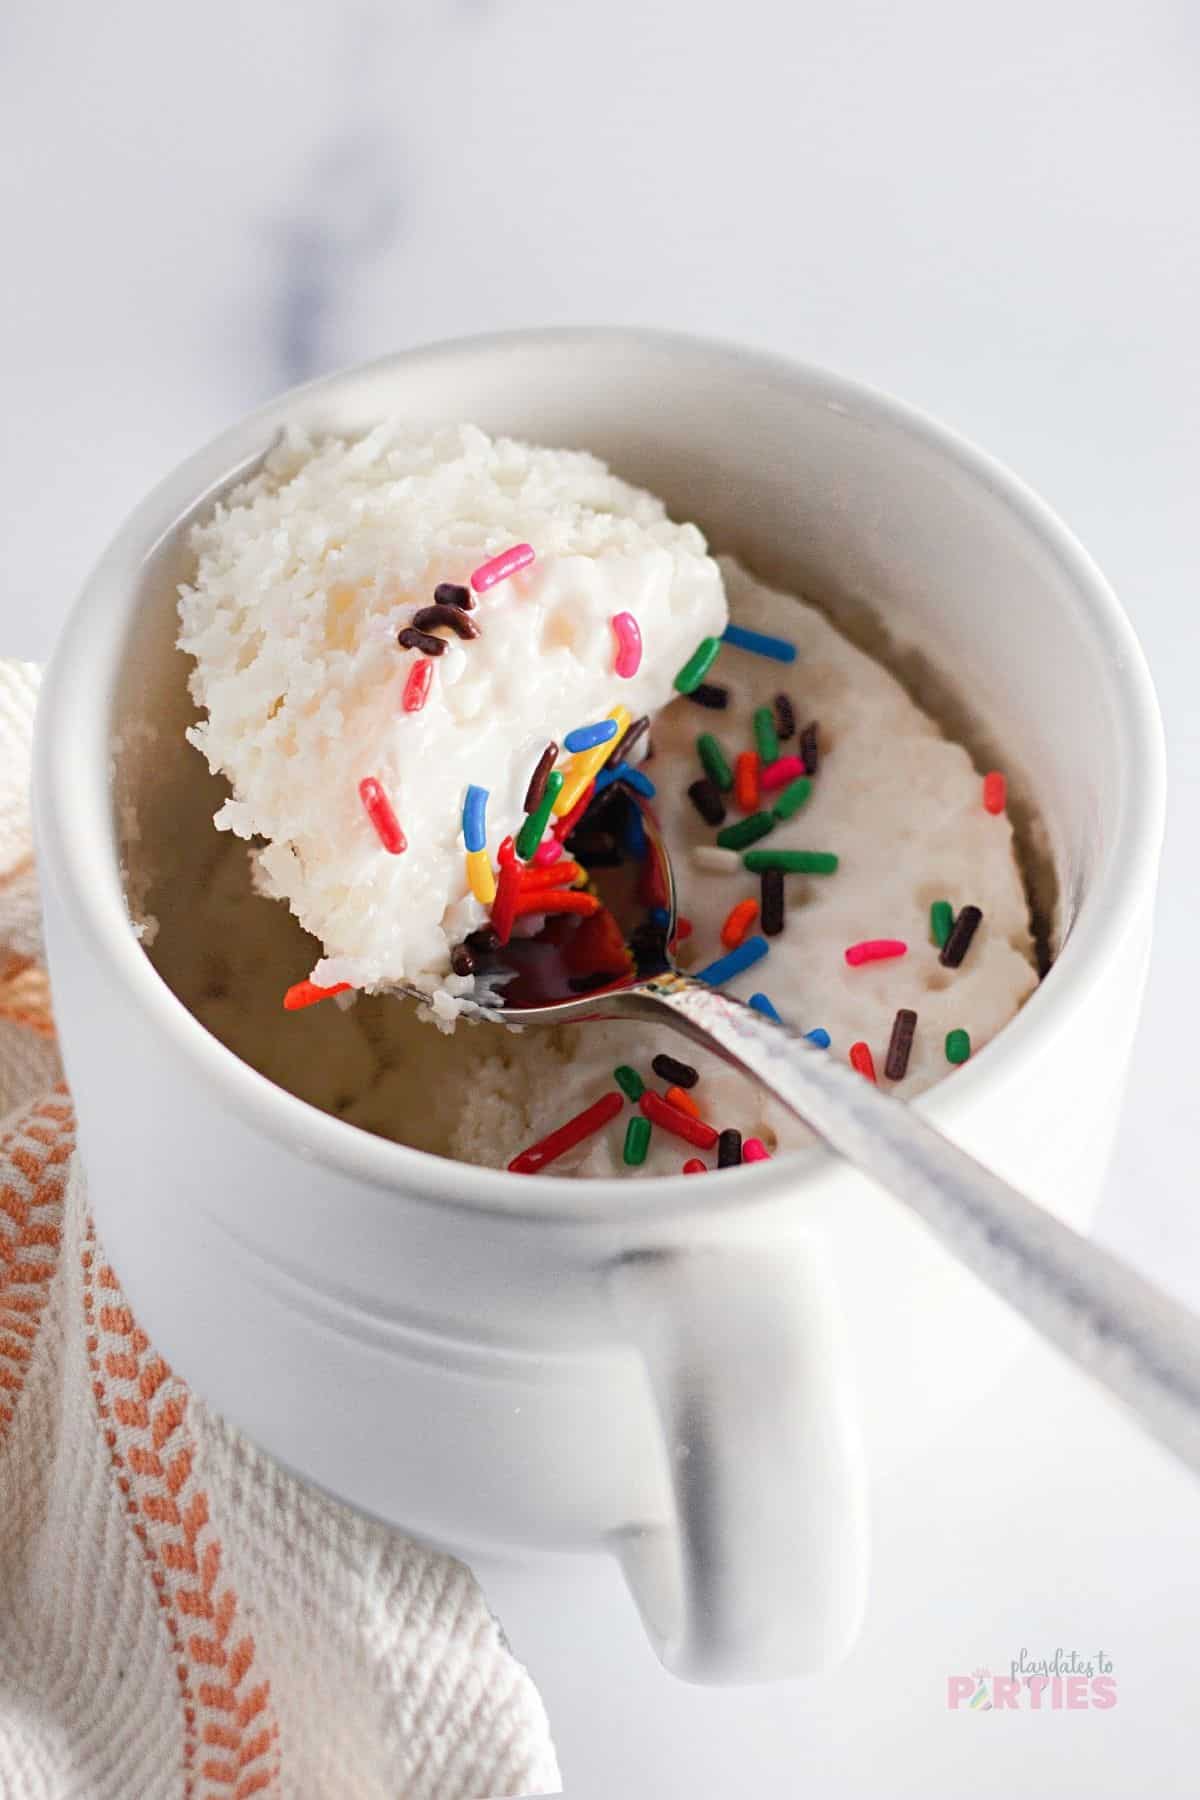 A spoon with cake mix, sprinkles, and frosting.